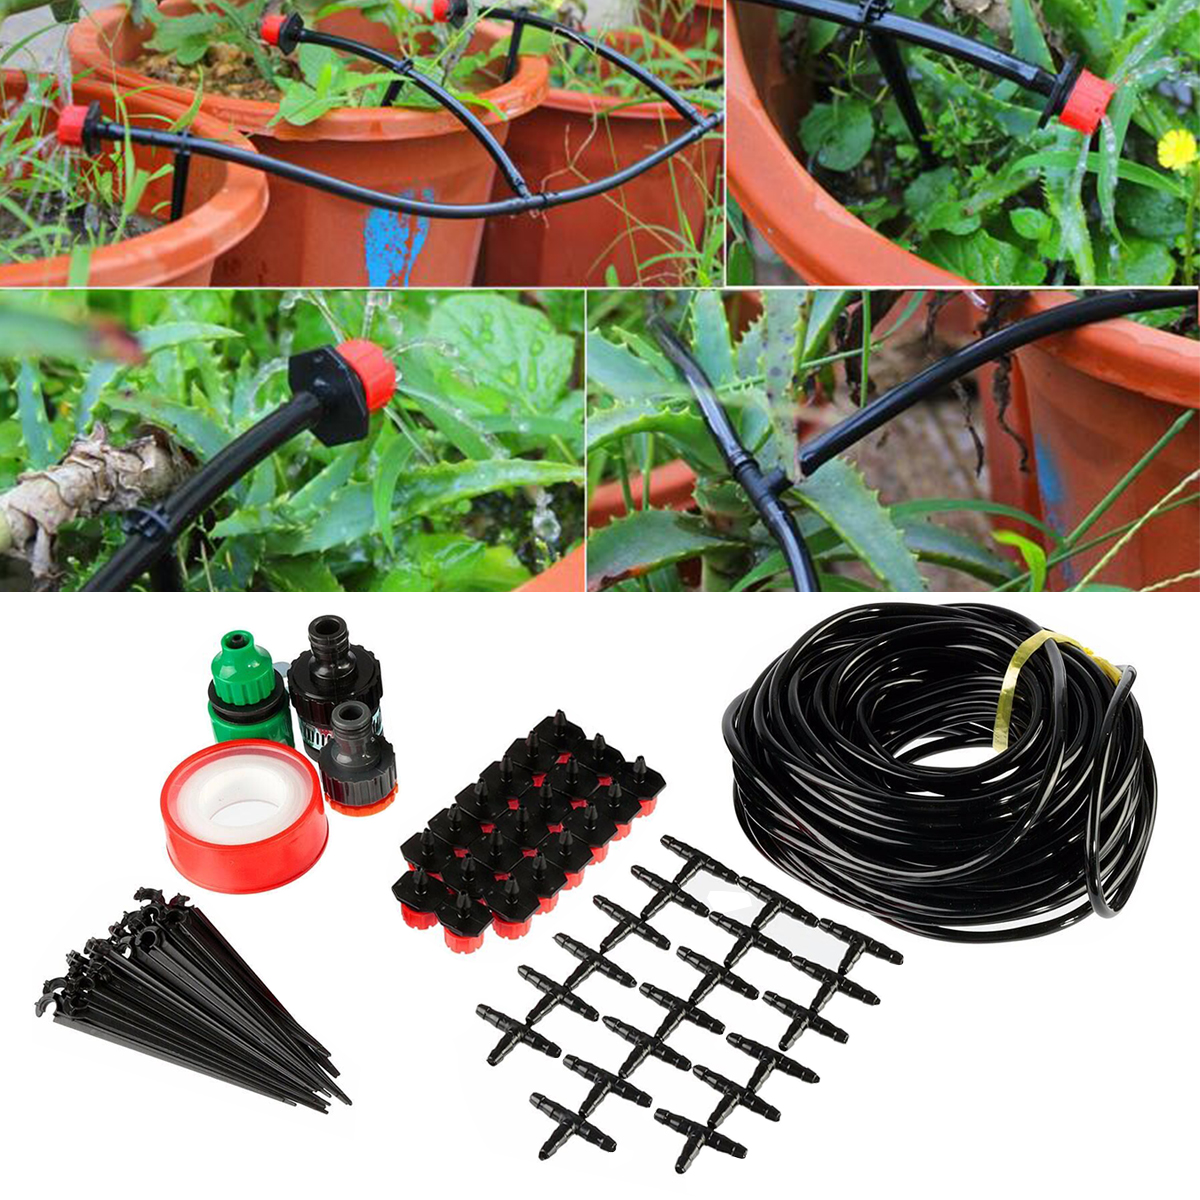 

15M Watering Irrigation Kits Automatic Sprinkler System Kit Micro Drip Irrigation Kit Accessories for Outdoor Garden Watering